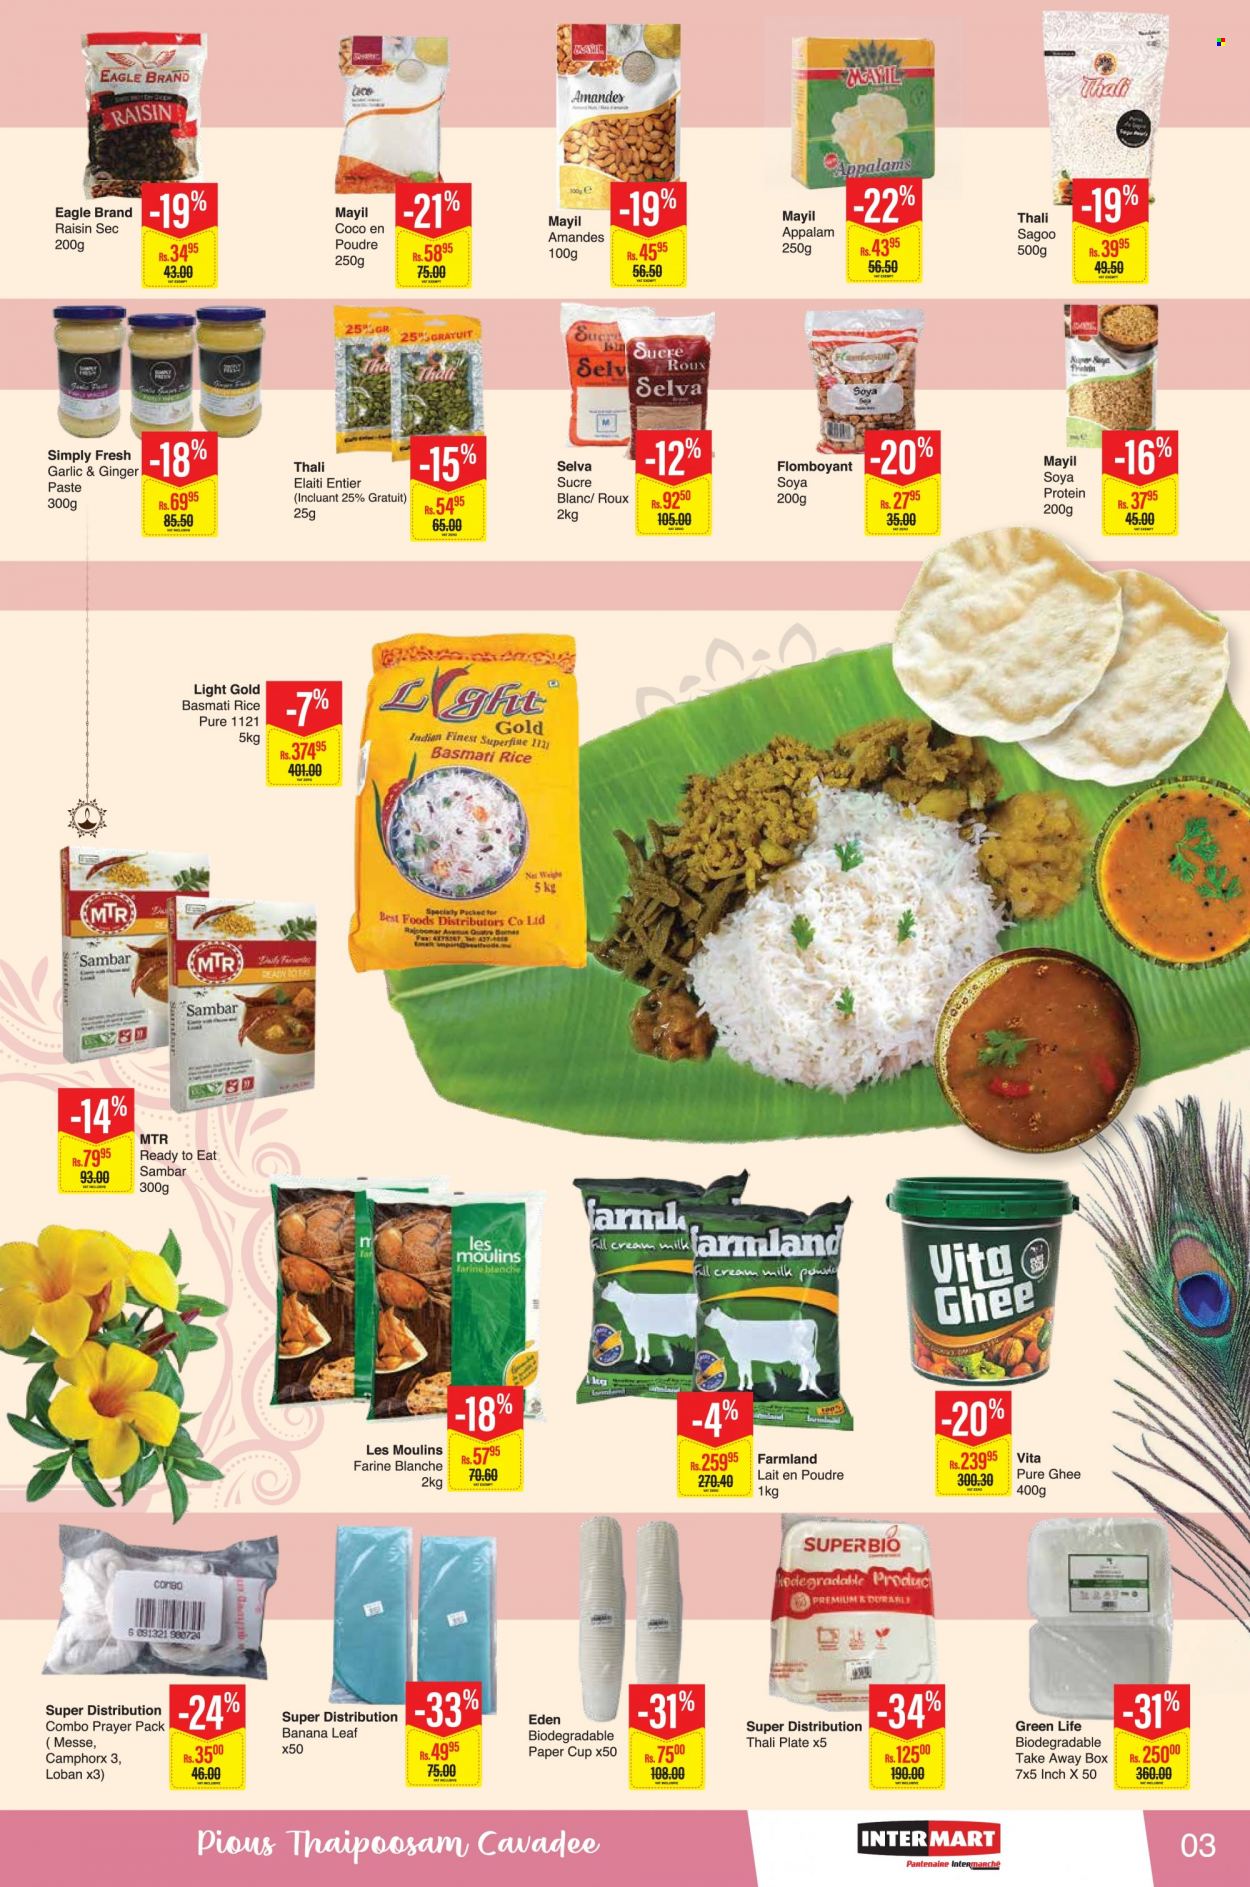 thumbnail - Intermart Catalogue - 24.01.2023 - 8.02.2023 - Sales products - MTR, ghee, basmati rice, rice, plate, cup. Page 3.